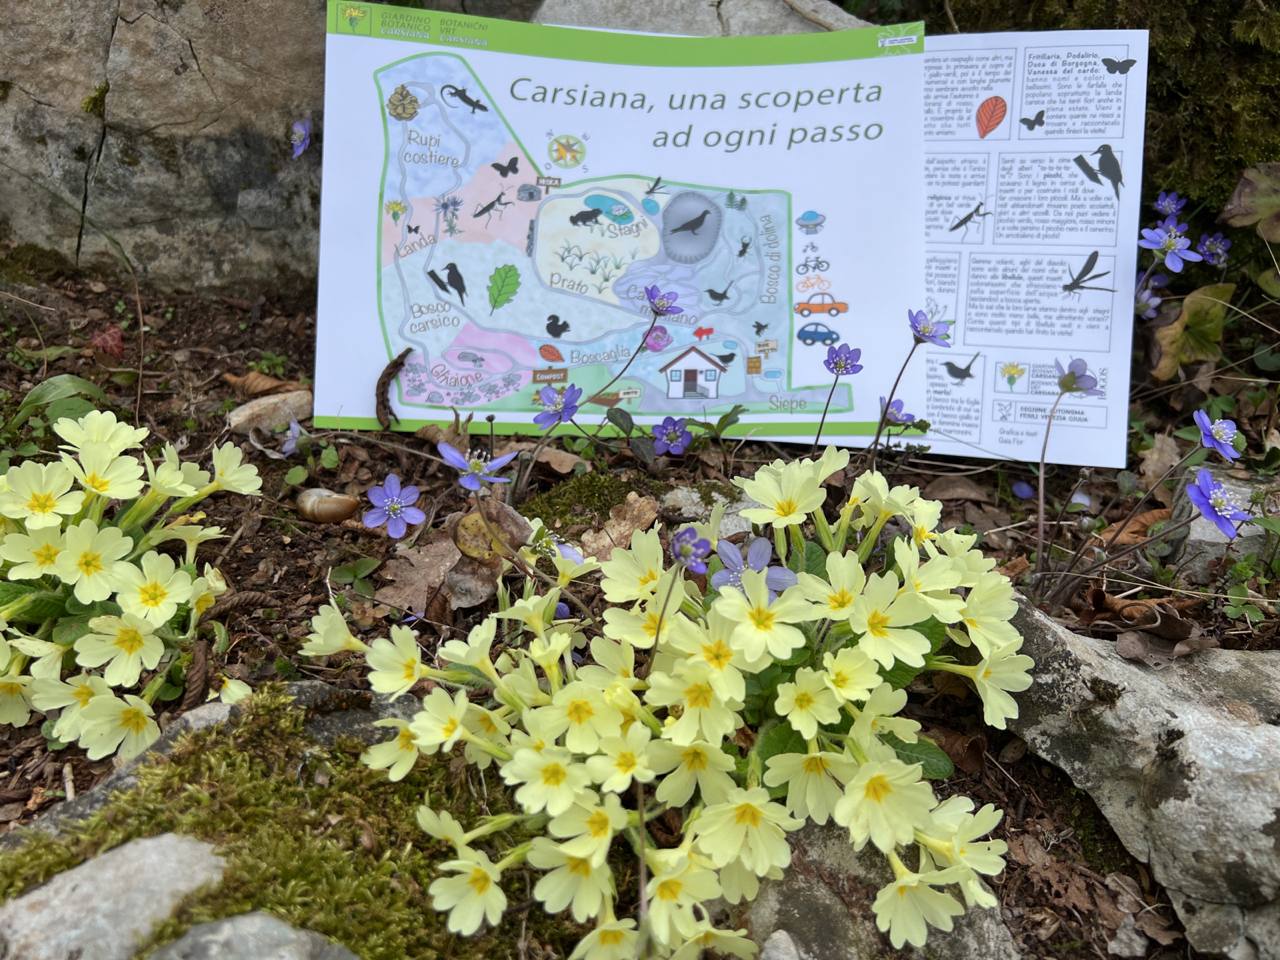 New map guide for children of the Carsiana Botanical Garden